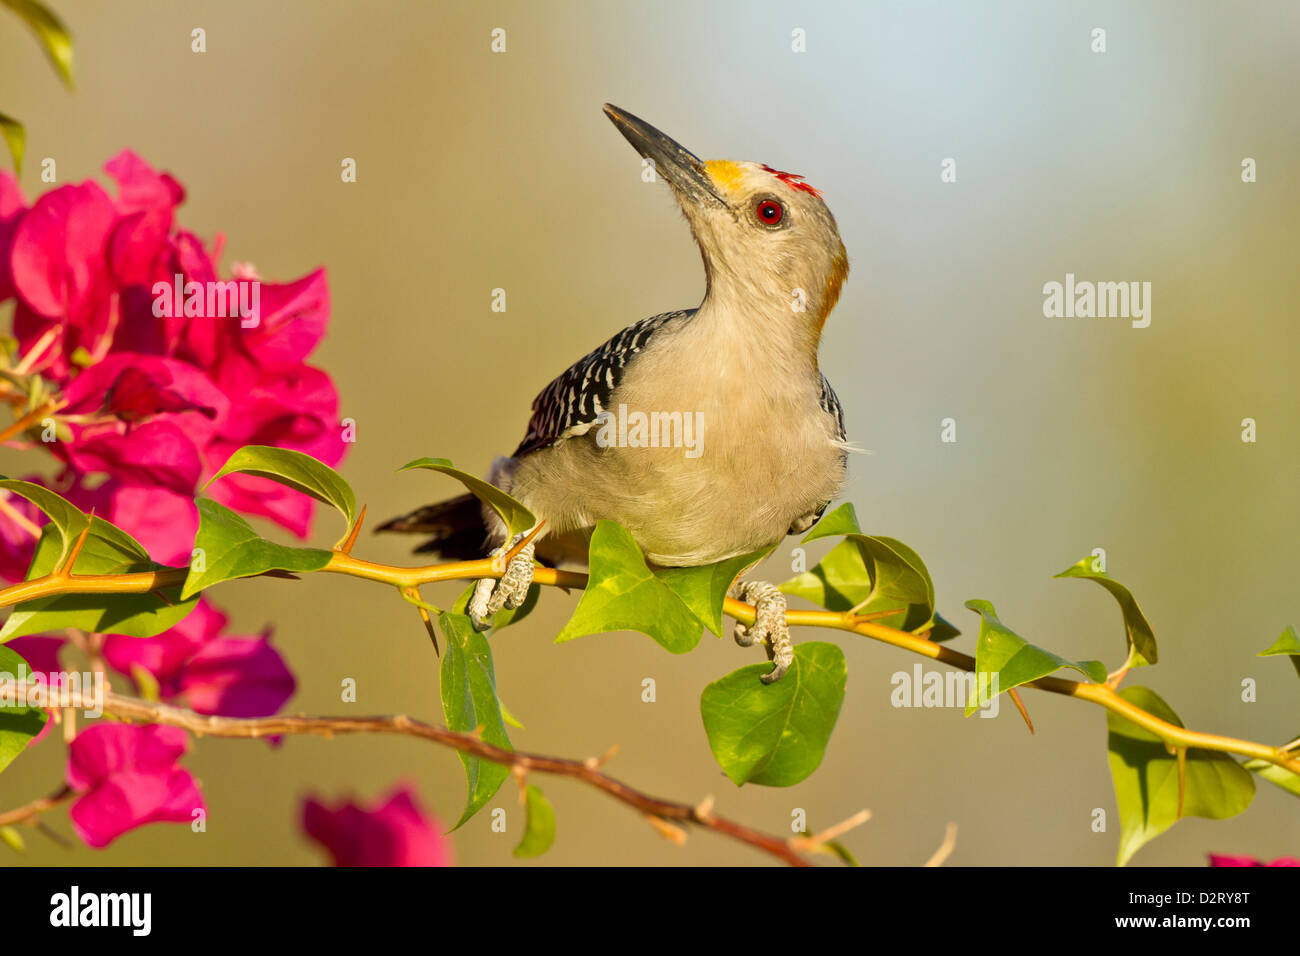 Golden-fronted Woodpecker (Melanerpes aurifrons) male perched in native habitat, s. Texas Stock Photo